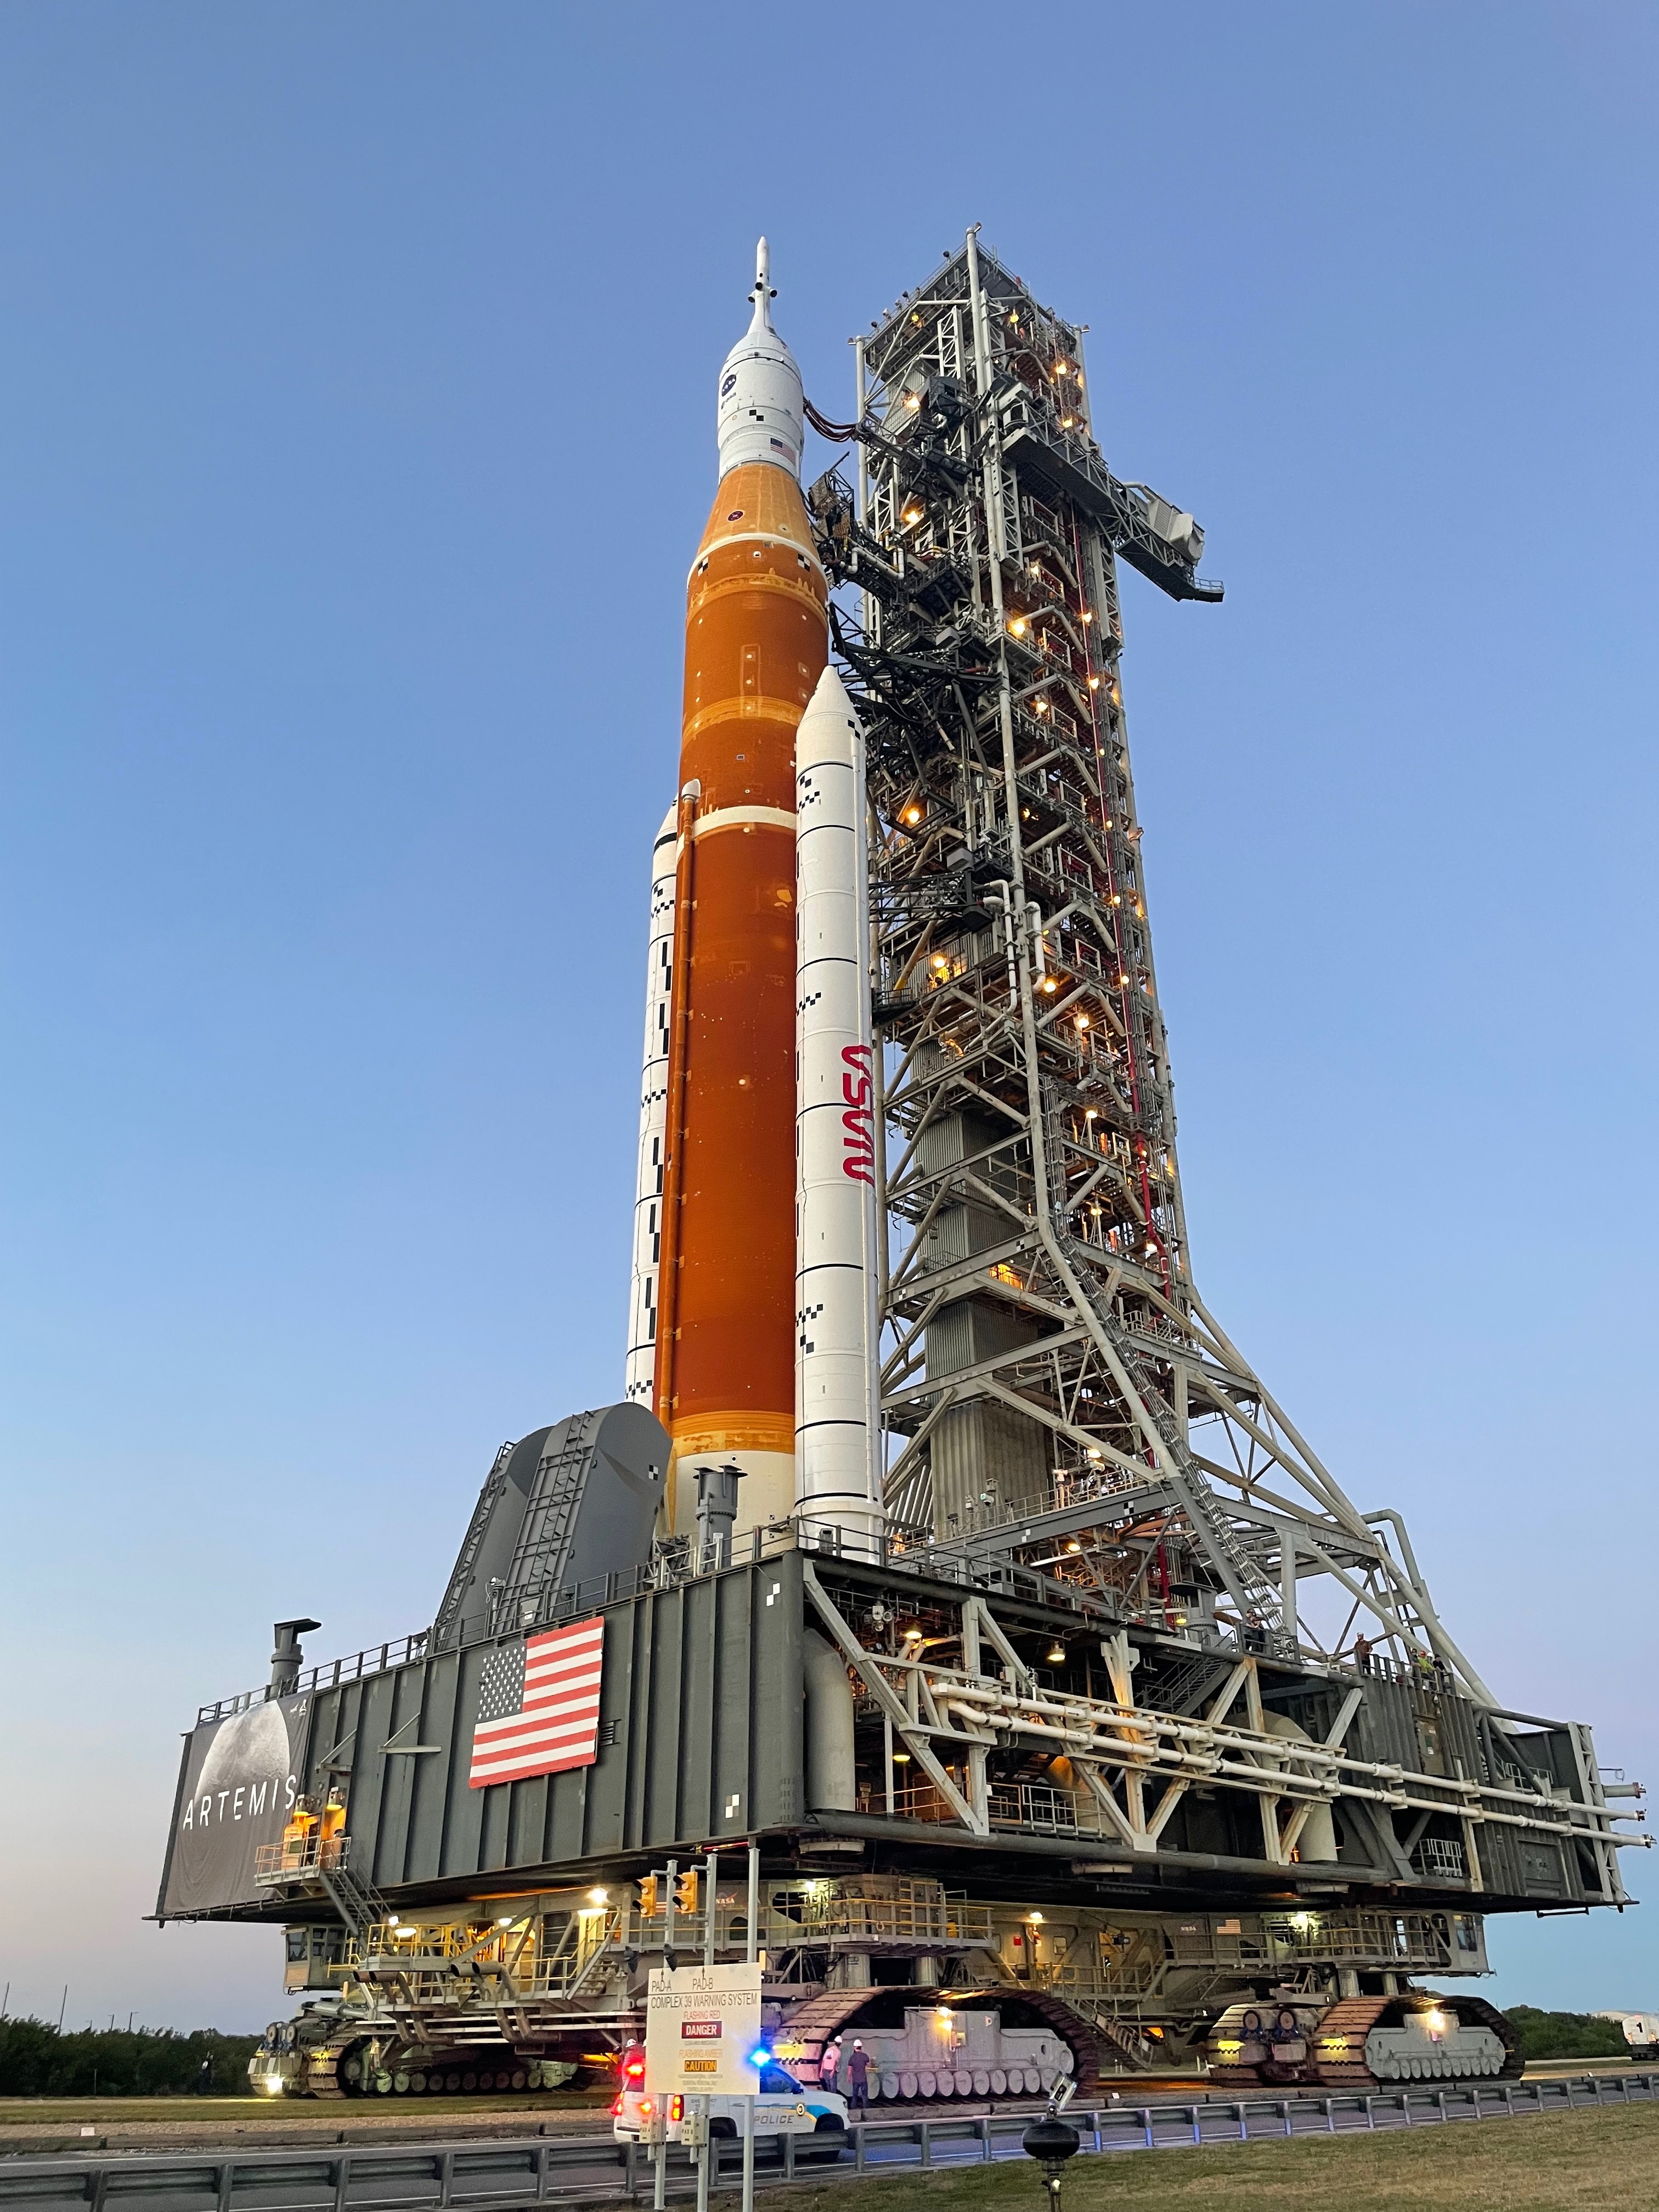 The Artemis 1 stack is being hauled to the pad by NASA's crawler-transporter 2, one of the largest vehicles every built. CT-2 was constructed in 1965 to support NASA's Apollo moon program and has been modified over the past few years to serve Artemis.